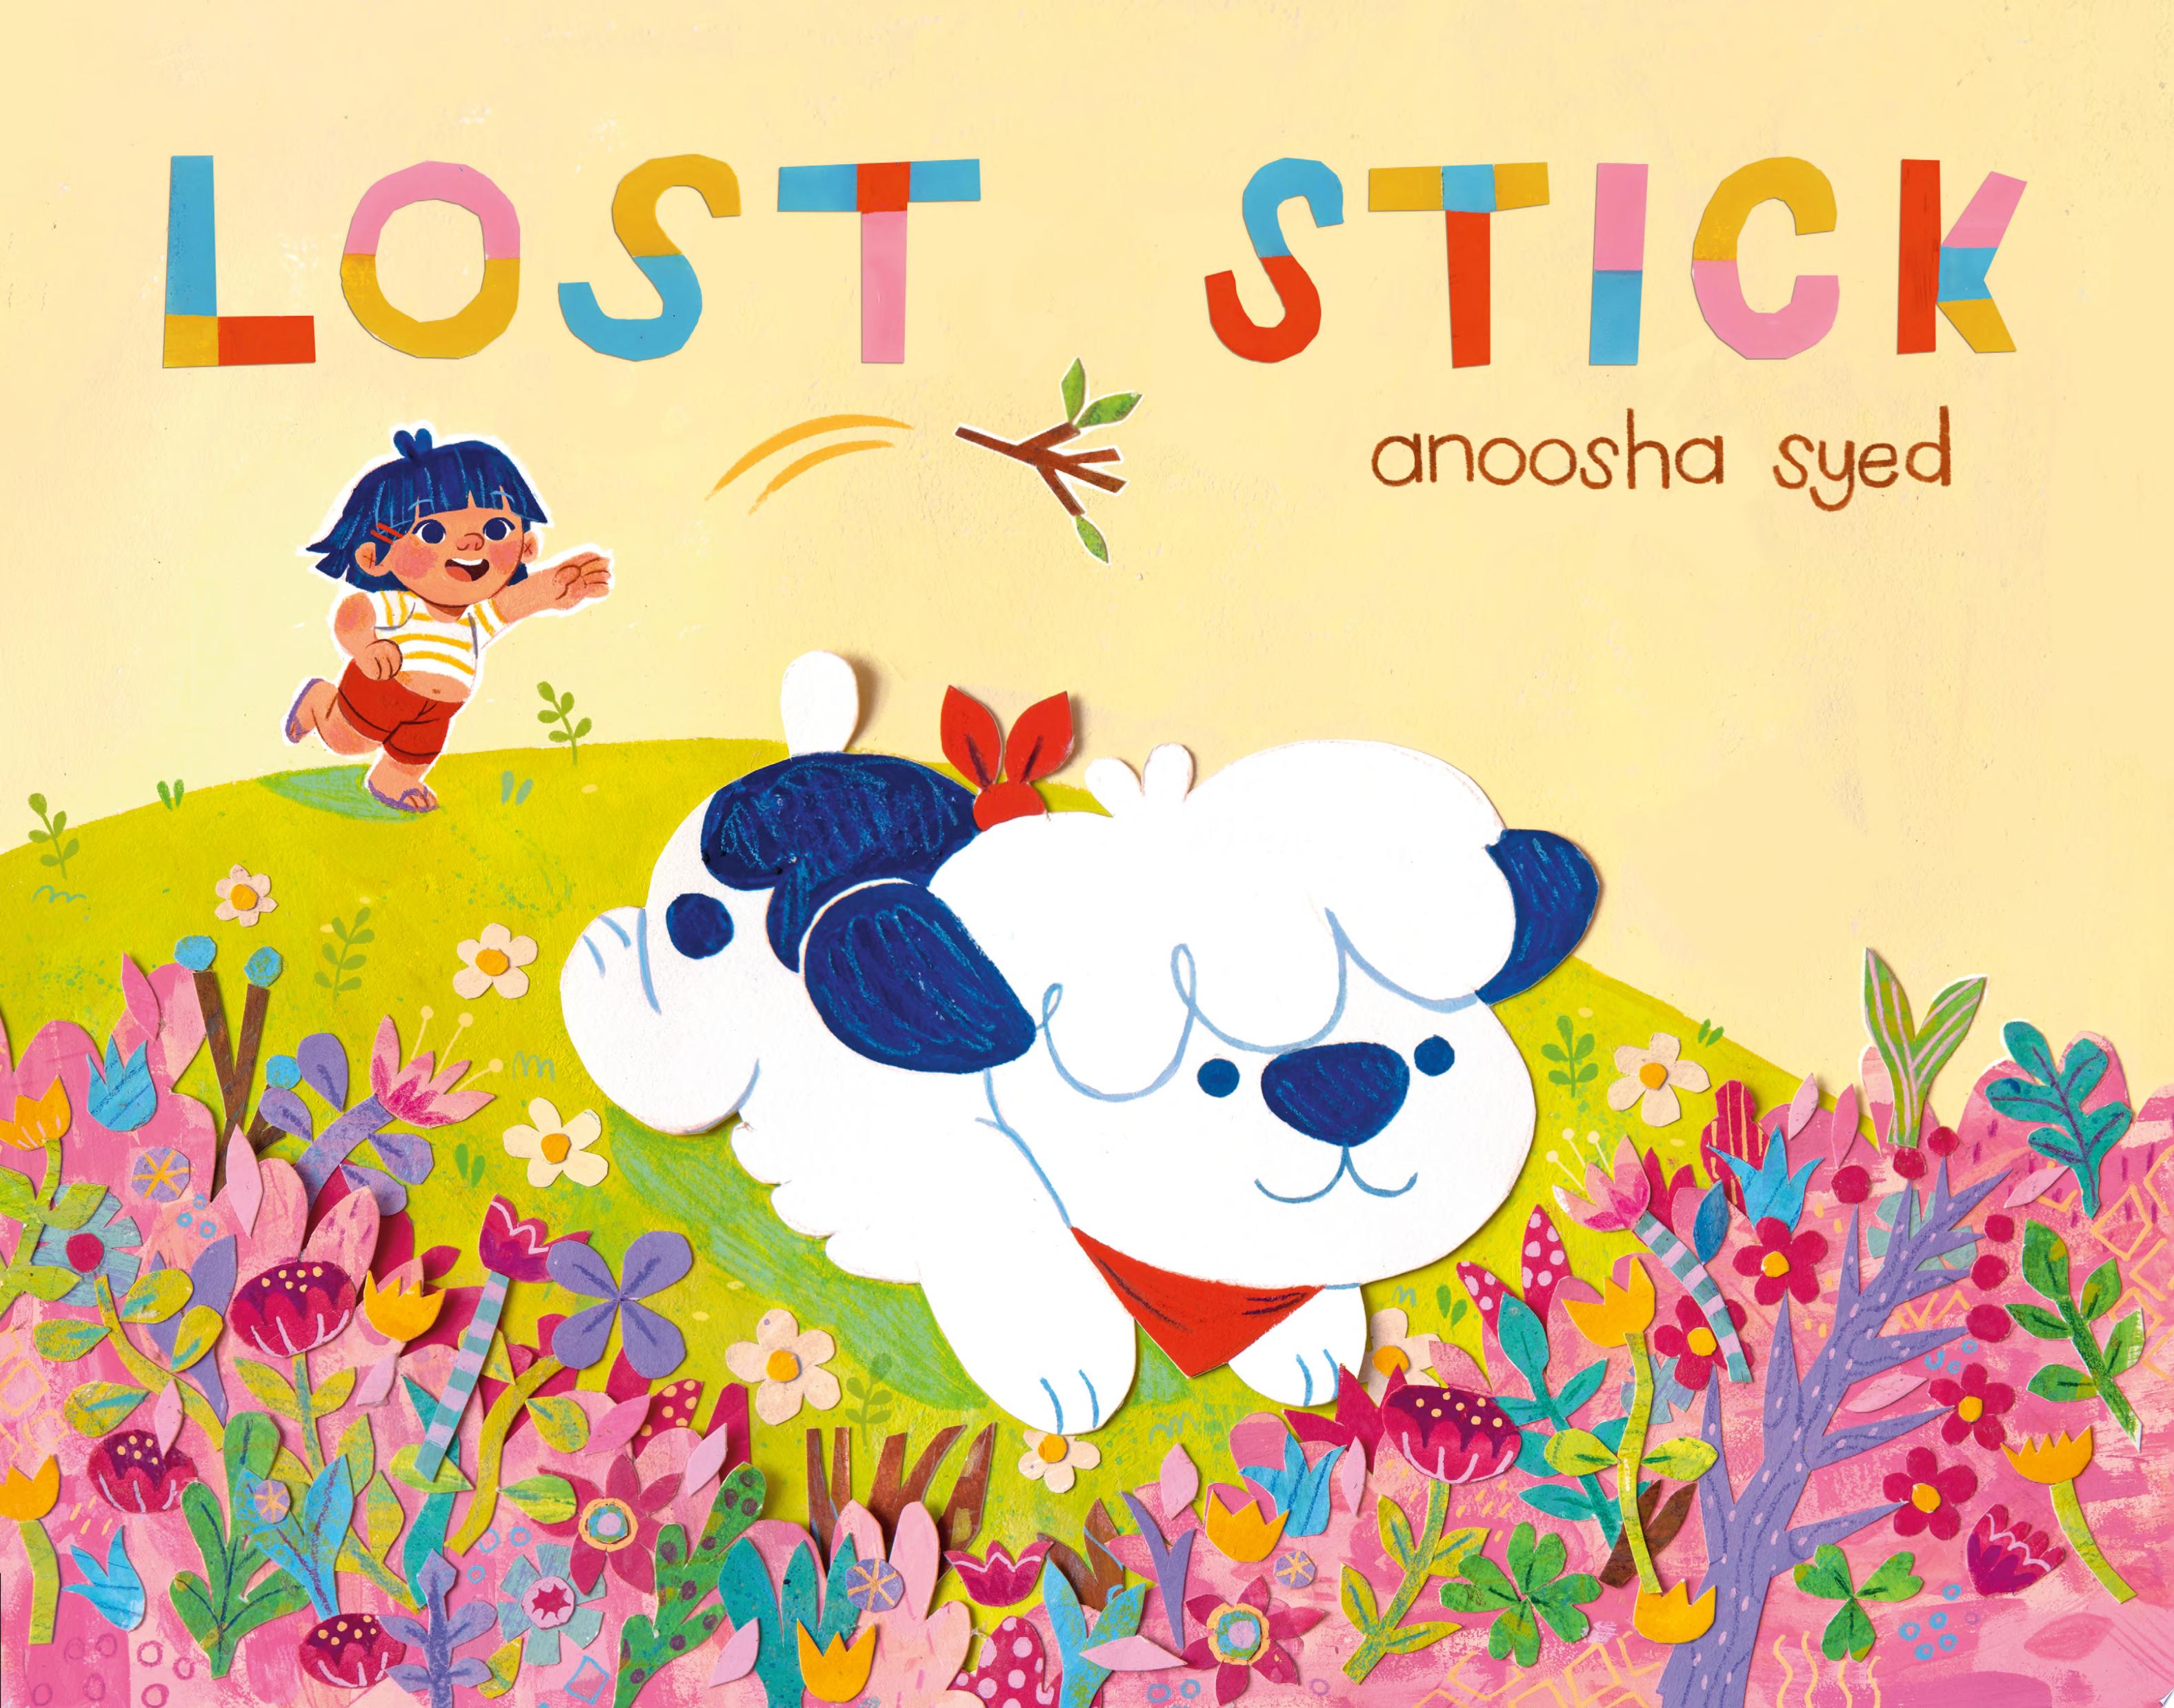 Image for "Lost Stick"